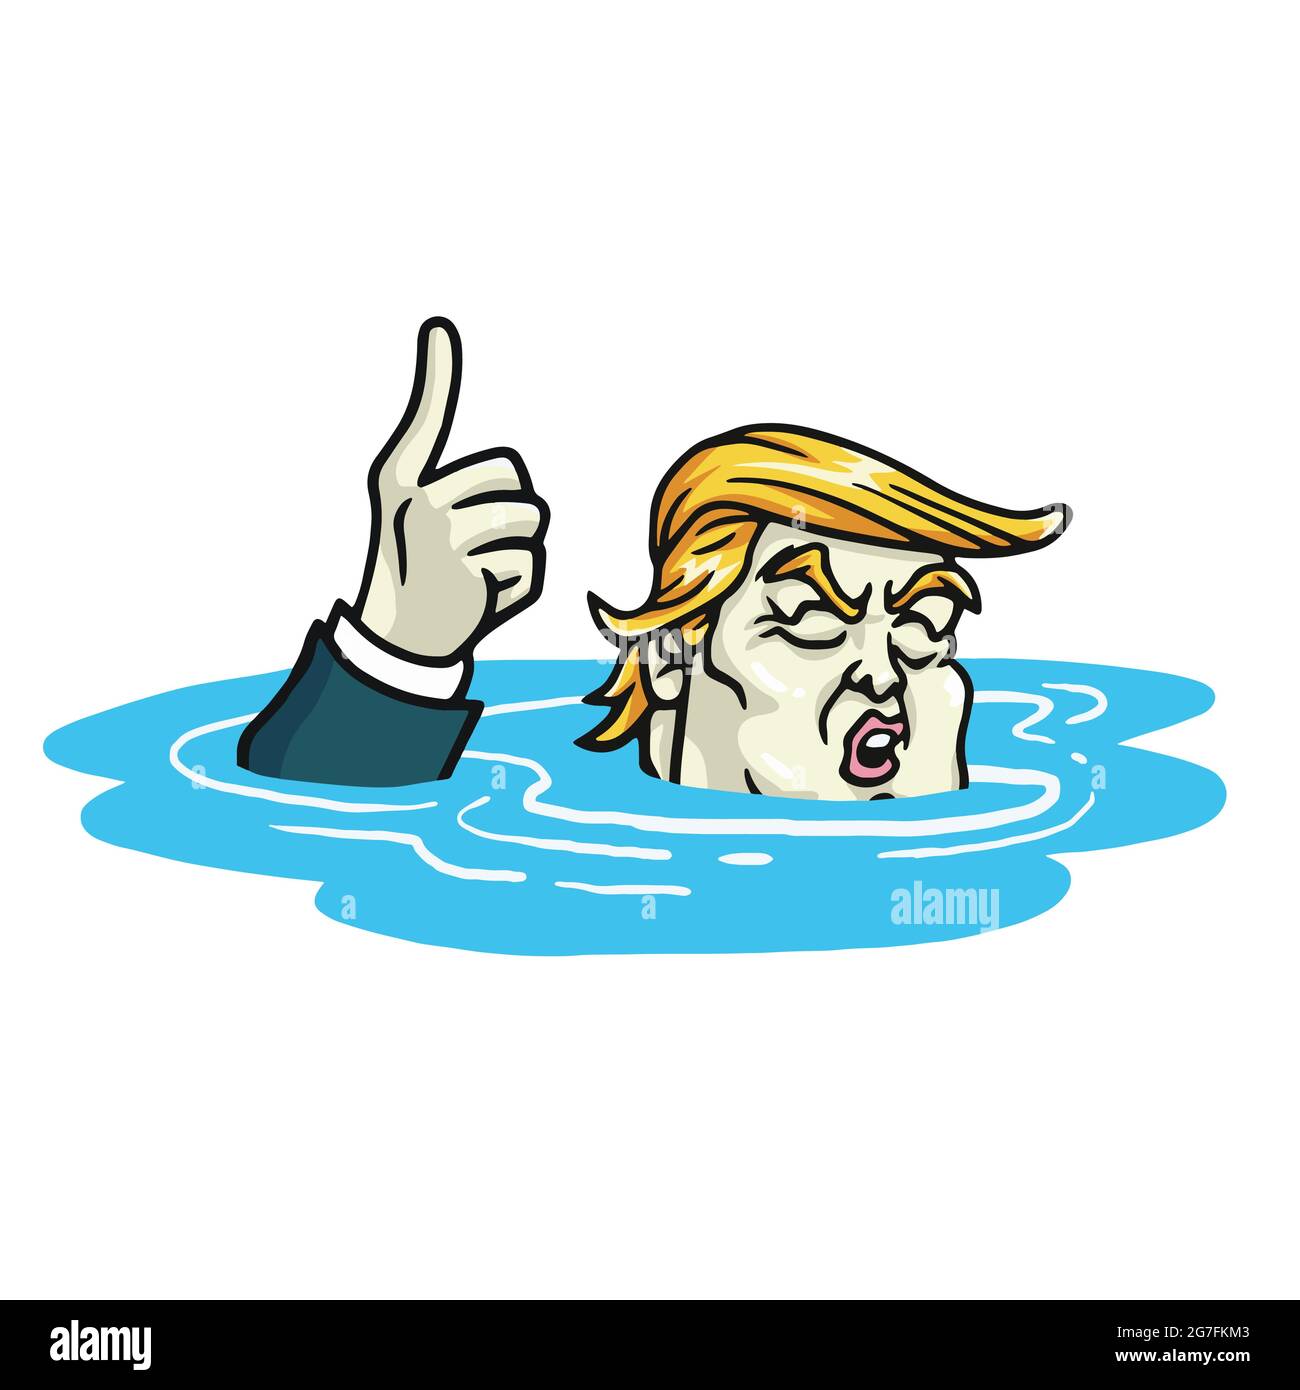 Donald Trump Drowning Climate Change Agreement. Cartoon Vector Illustration Stock Vector